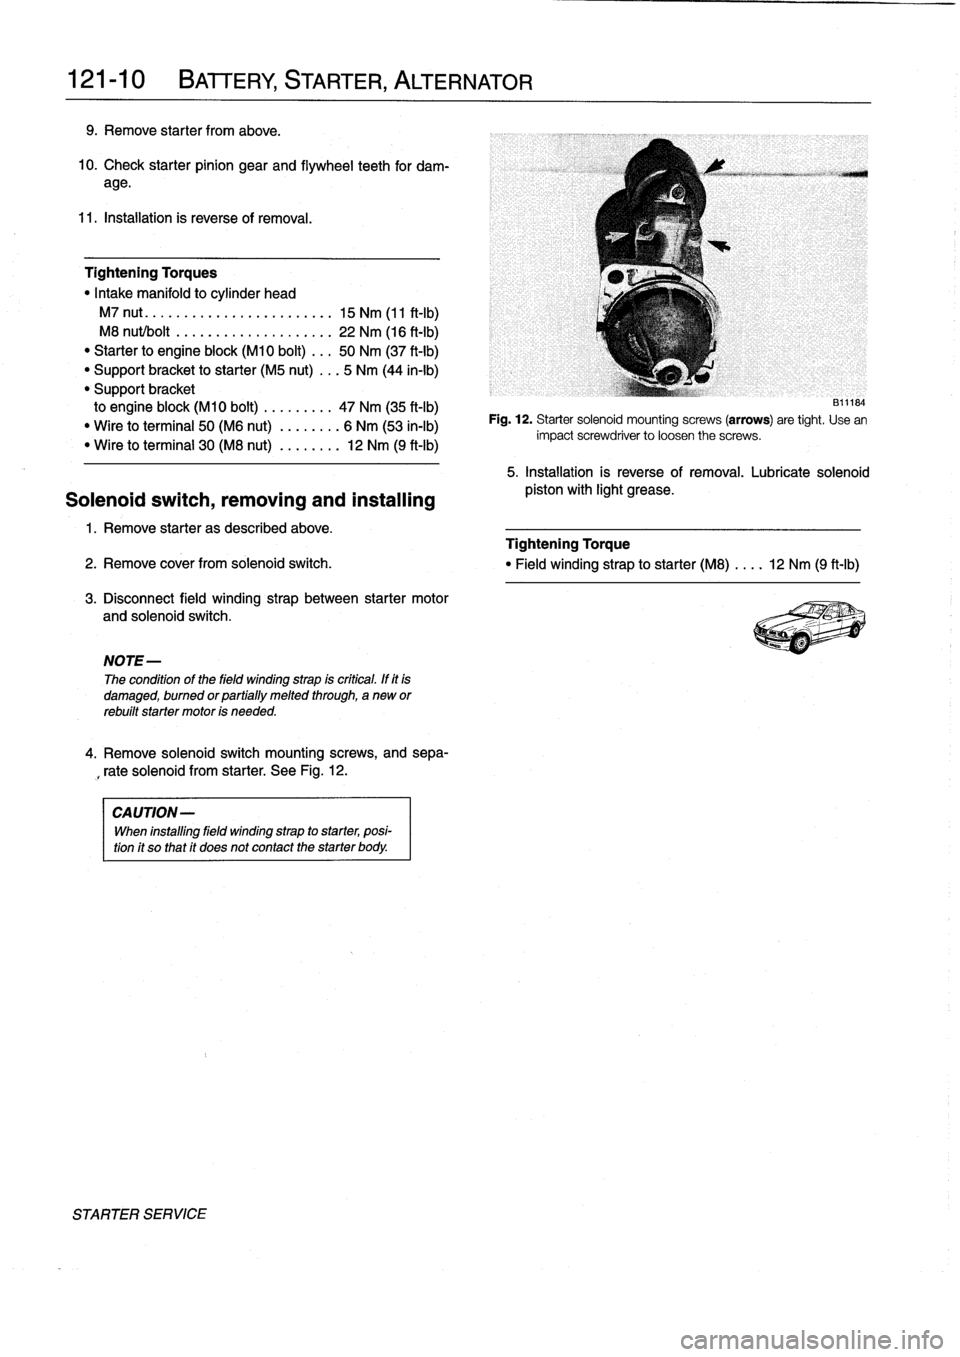 BMW 318i 1997 E36 Repair Manual 
121-1
O

	

BATTERY,
STARTER,
ALTERNATOR

9
.
Remove
starter
from
above
.

10
.
Check
starter
pinion
gear
and
flywheel
teeth
for
dam-
age
.

11
.
Installation
is
reverse
of
removal
.

Tightening
Torq